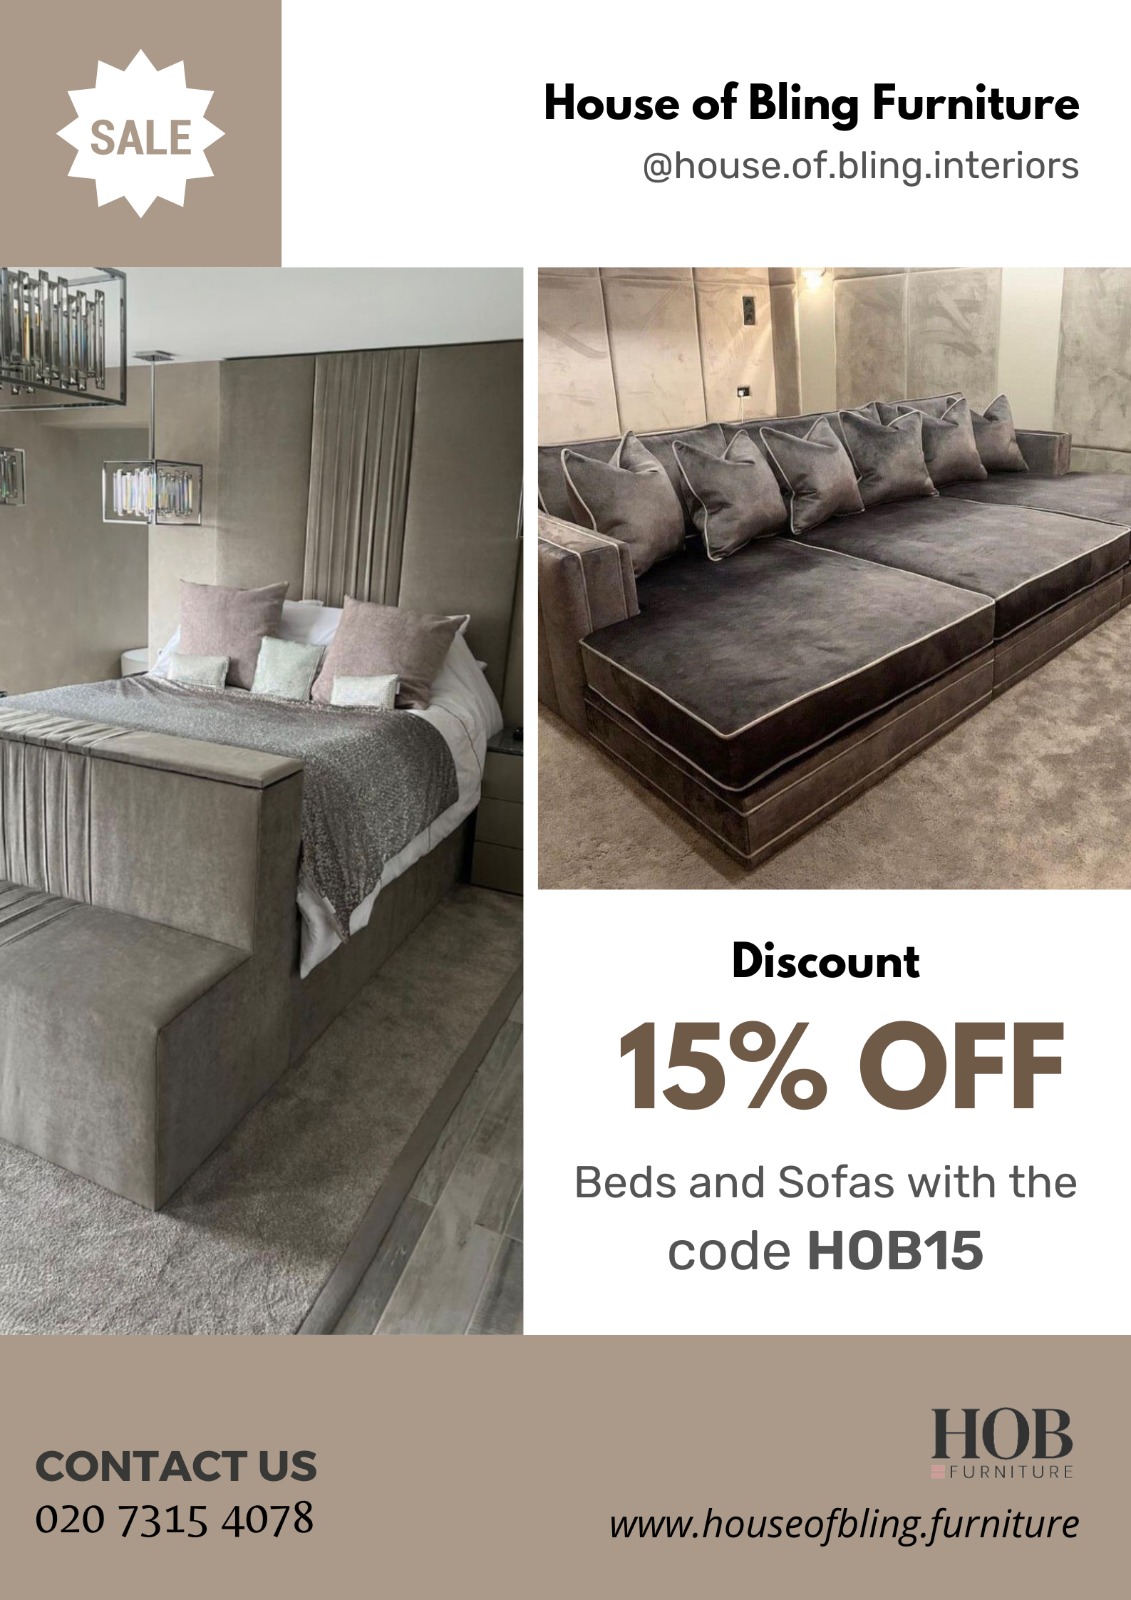 House of Bling Furniture @house.of.bling.interiors Discount 15% OFF Beds and Sofas with the code HOB15 